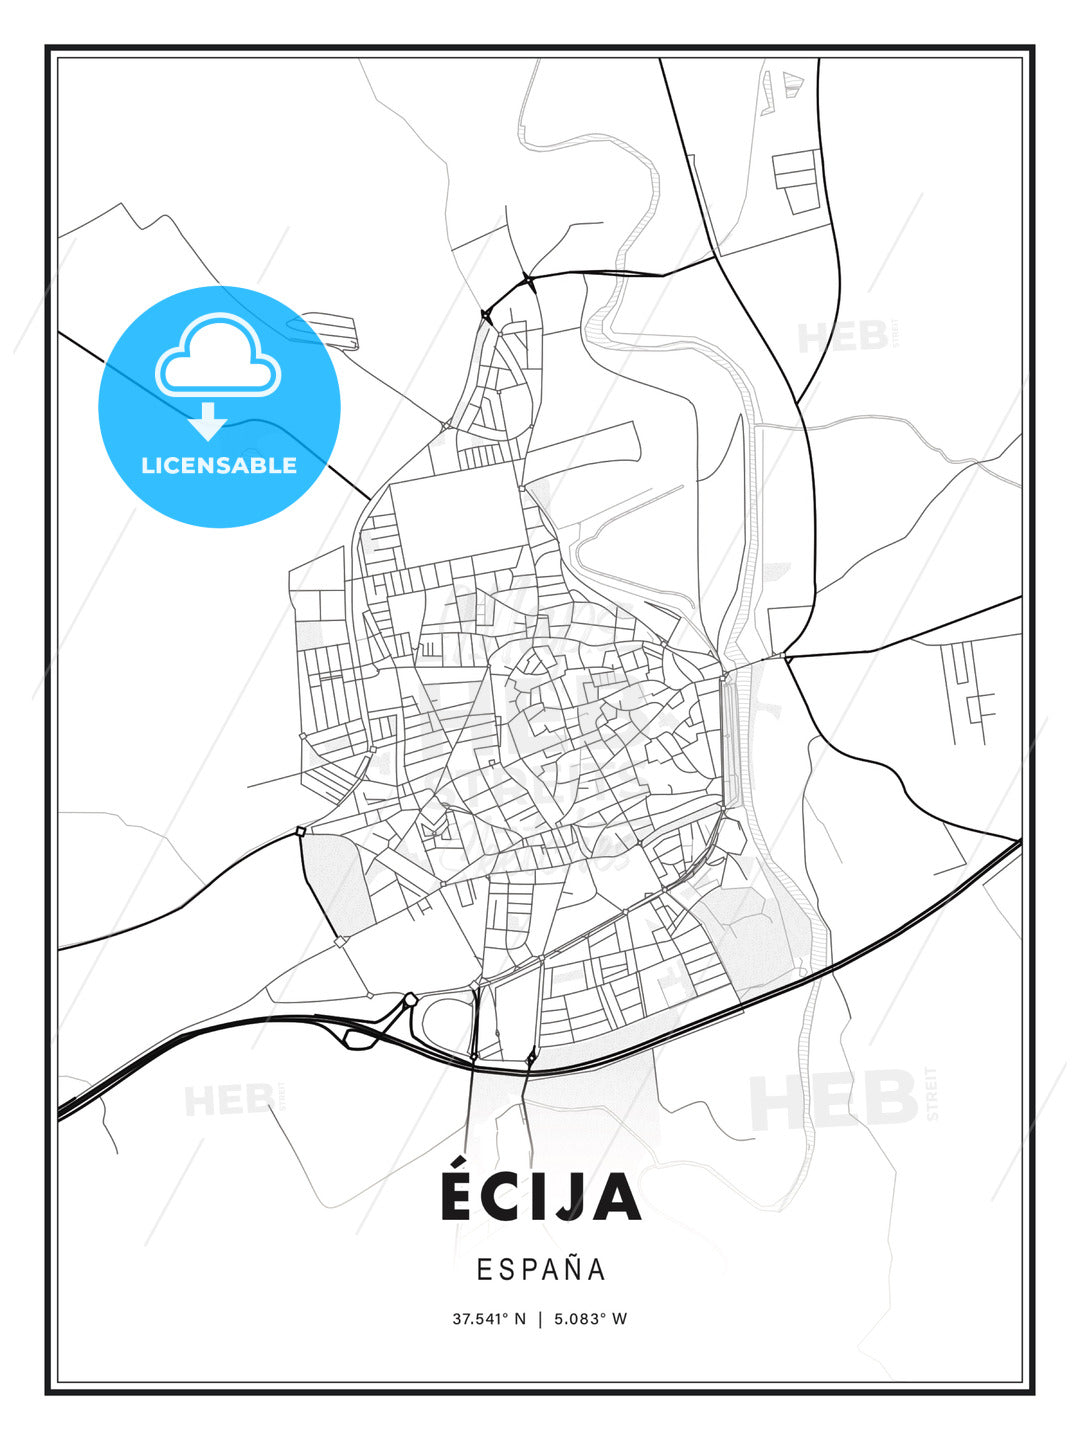 Écija, Spain, Modern Print Template in Various Formats - HEBSTREITS Sketches